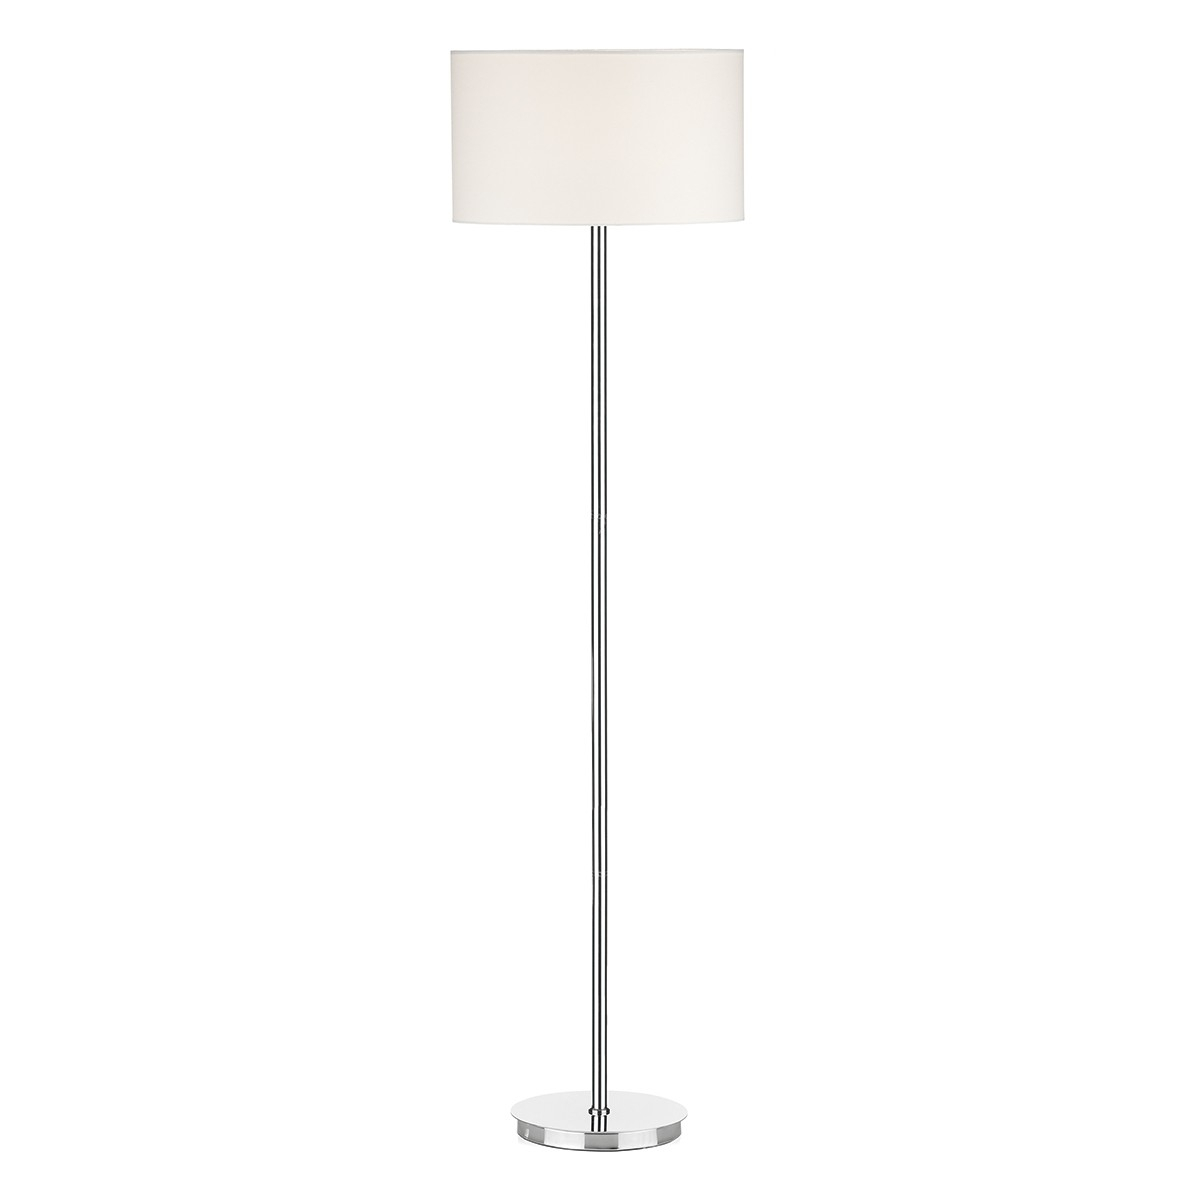 Dr Tus4950 Tuscan Floor Lamp Base Only Polished Chrome inside proportions 1200 X 1200